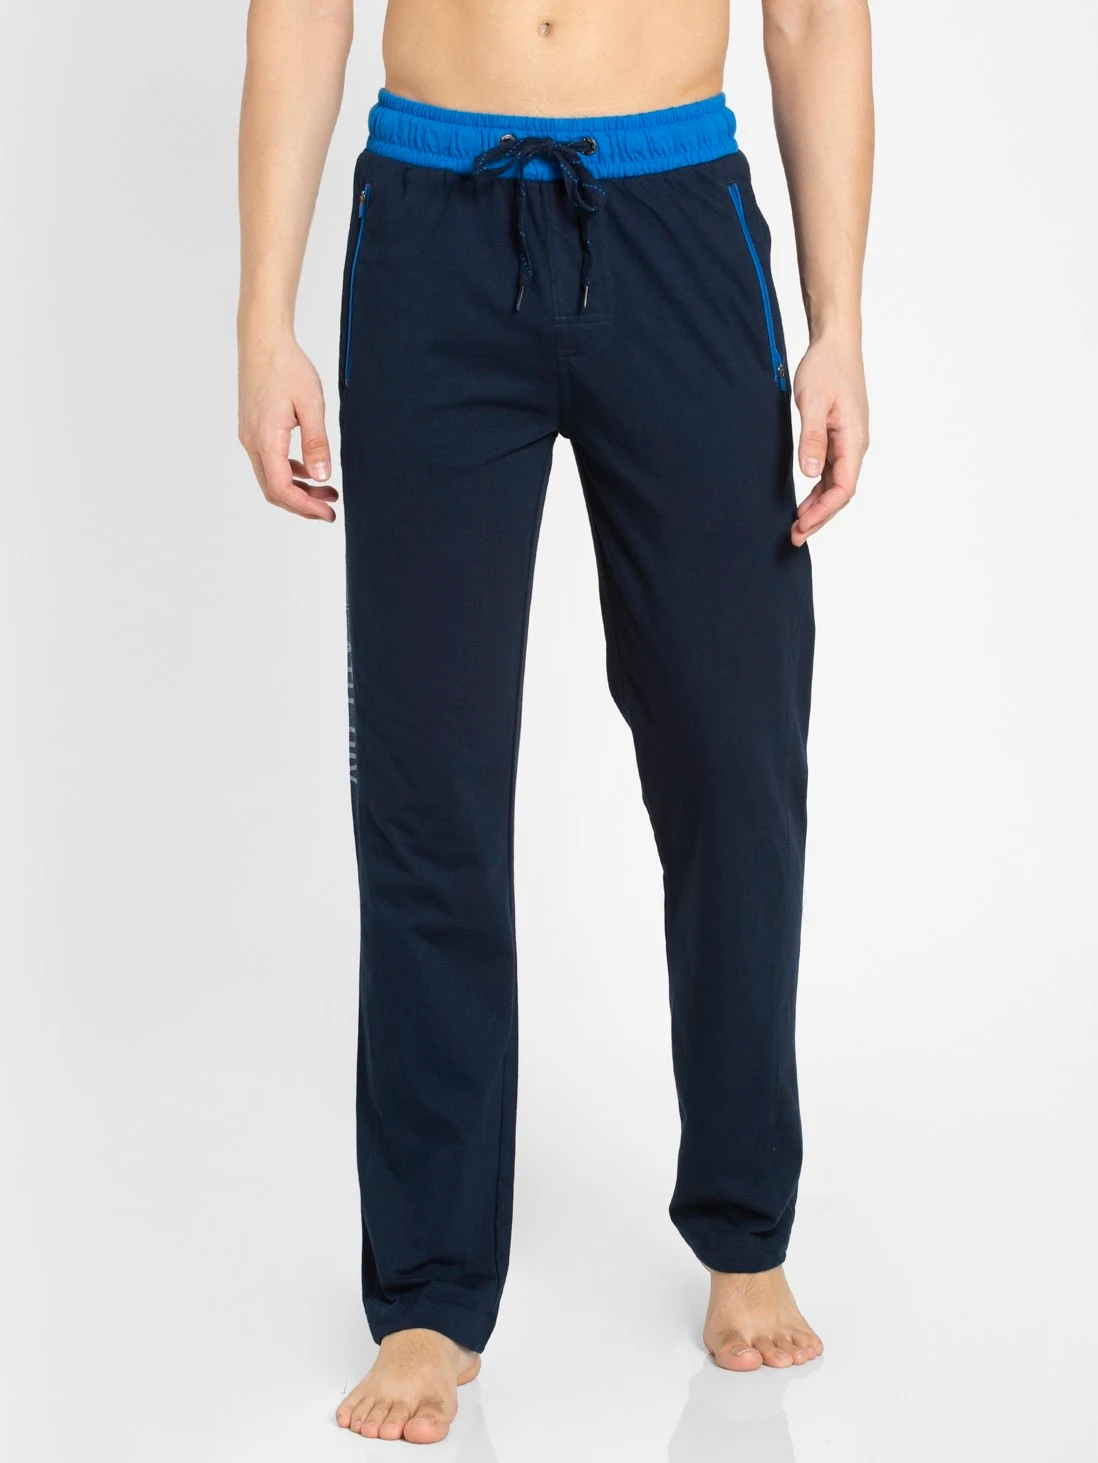 Jockey 9508 Men's Super Combed Cotton Rich Straight Fit Trackpants